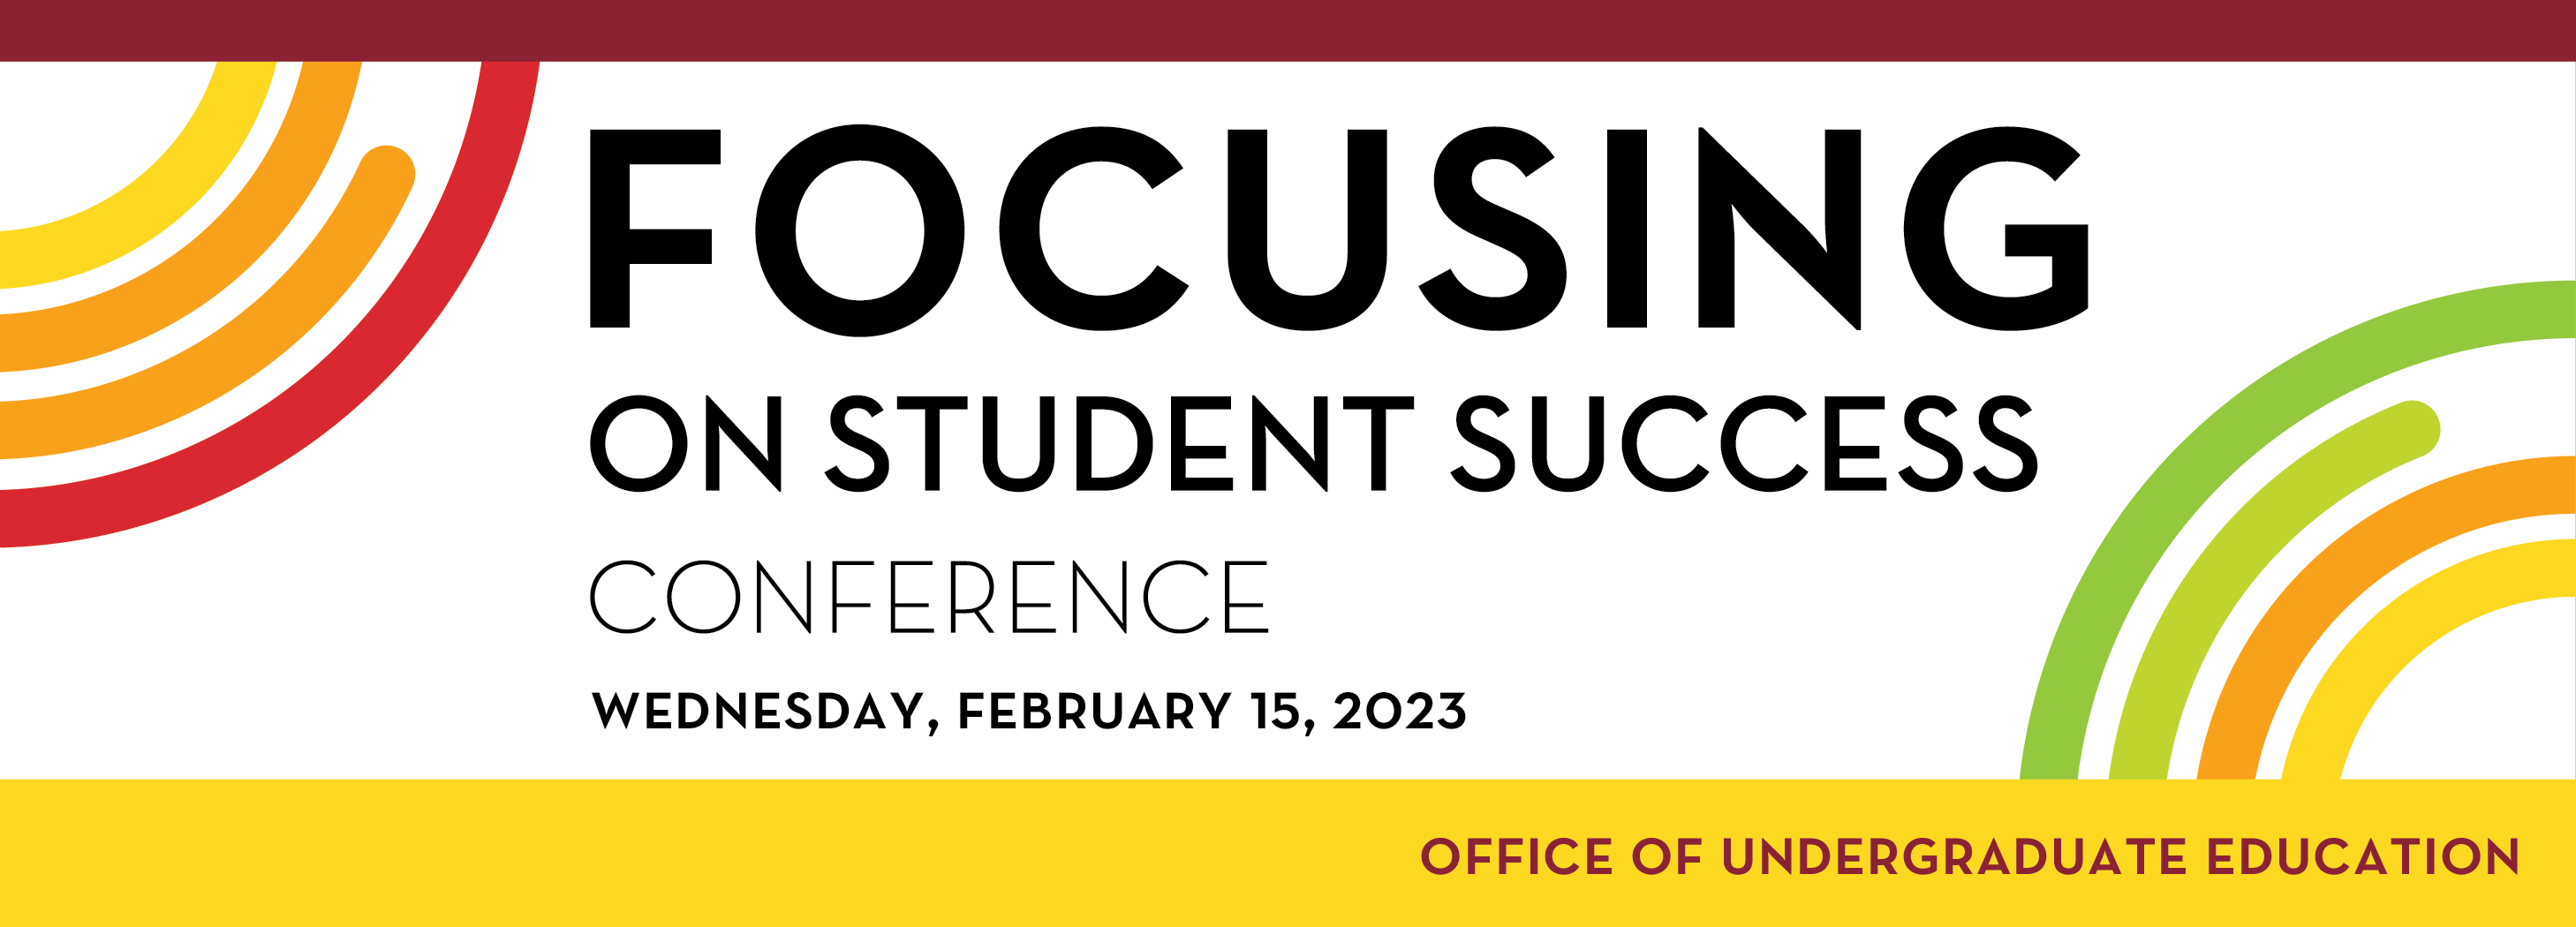 Focusing on Student Success Conference. Wednesday, February 15, 2023.